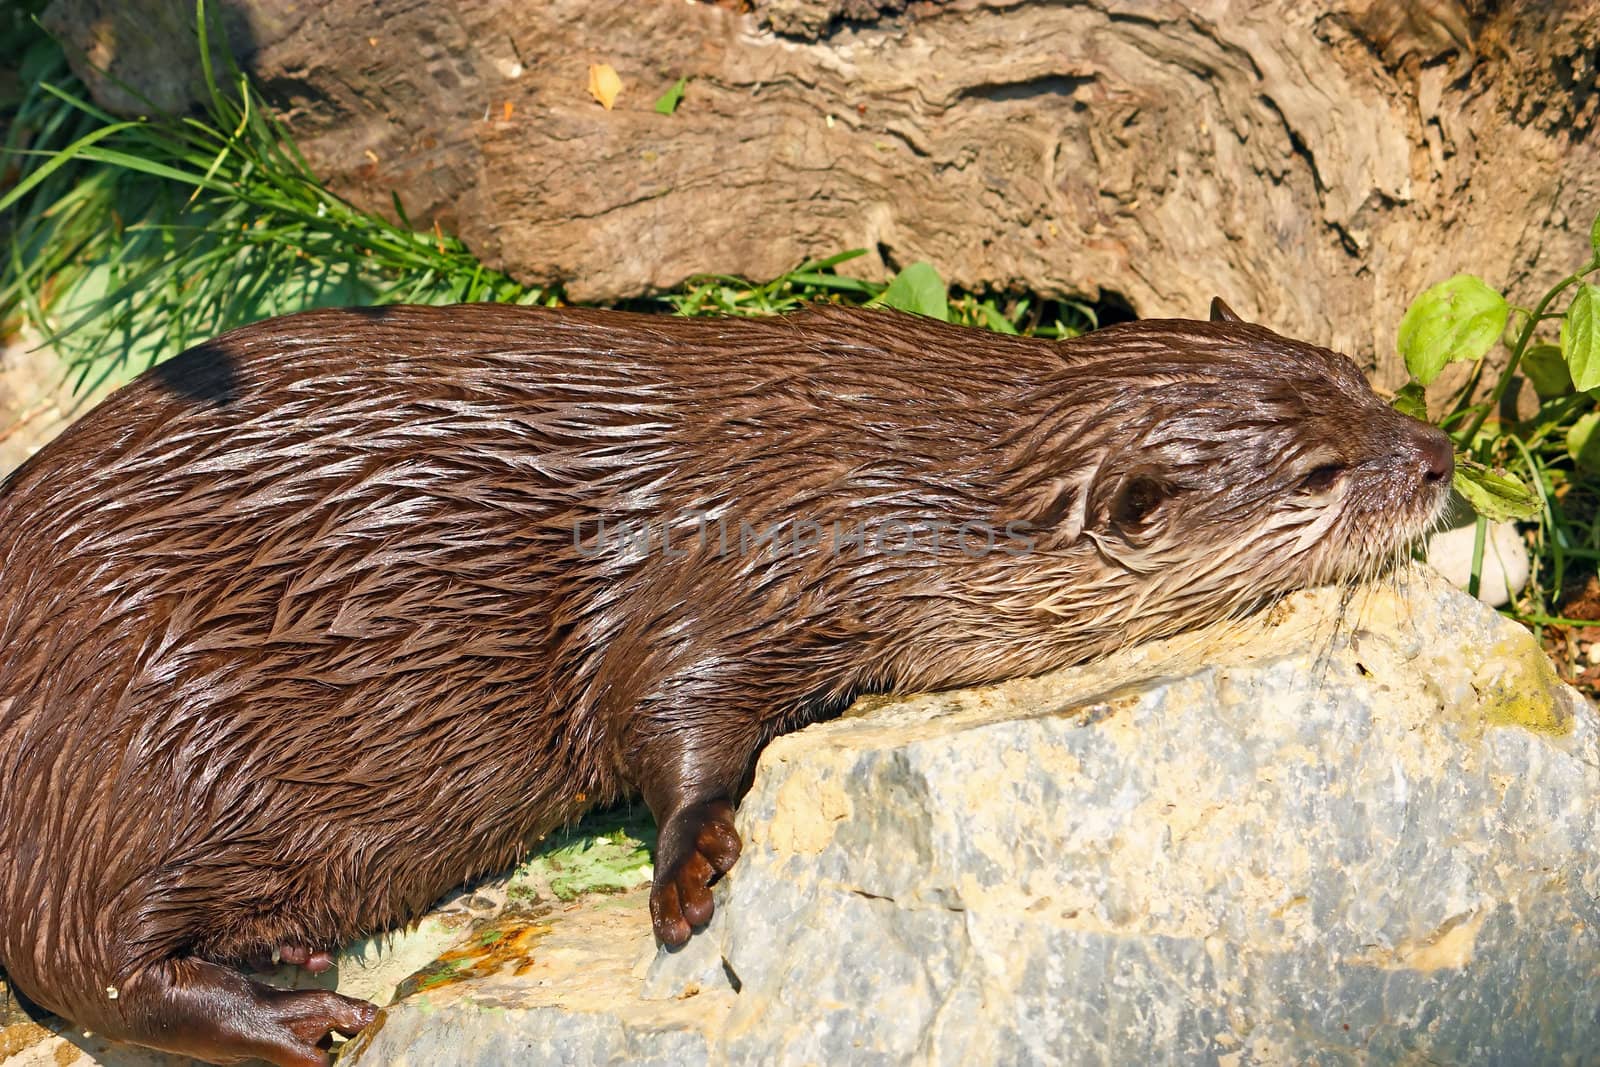 An oriental small-clawed otter taking a break after game